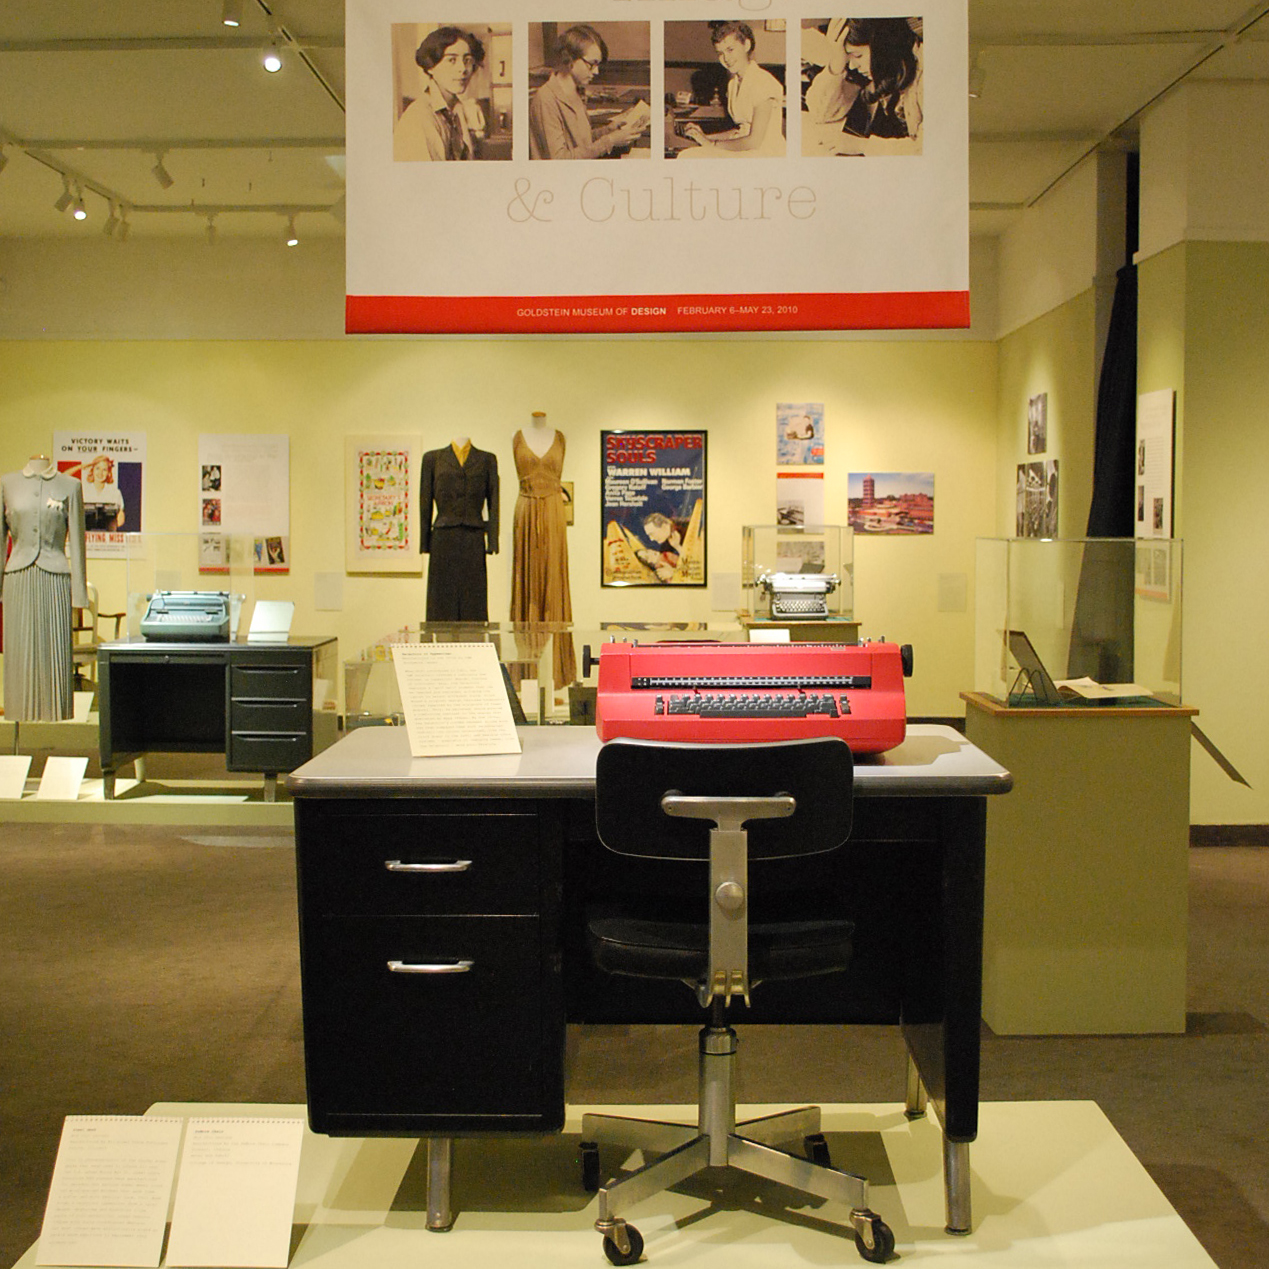 How Secretaries Changed the 20th-Century office: Design, Image, and Culture exhibition with posters, clothing, and furniture on display